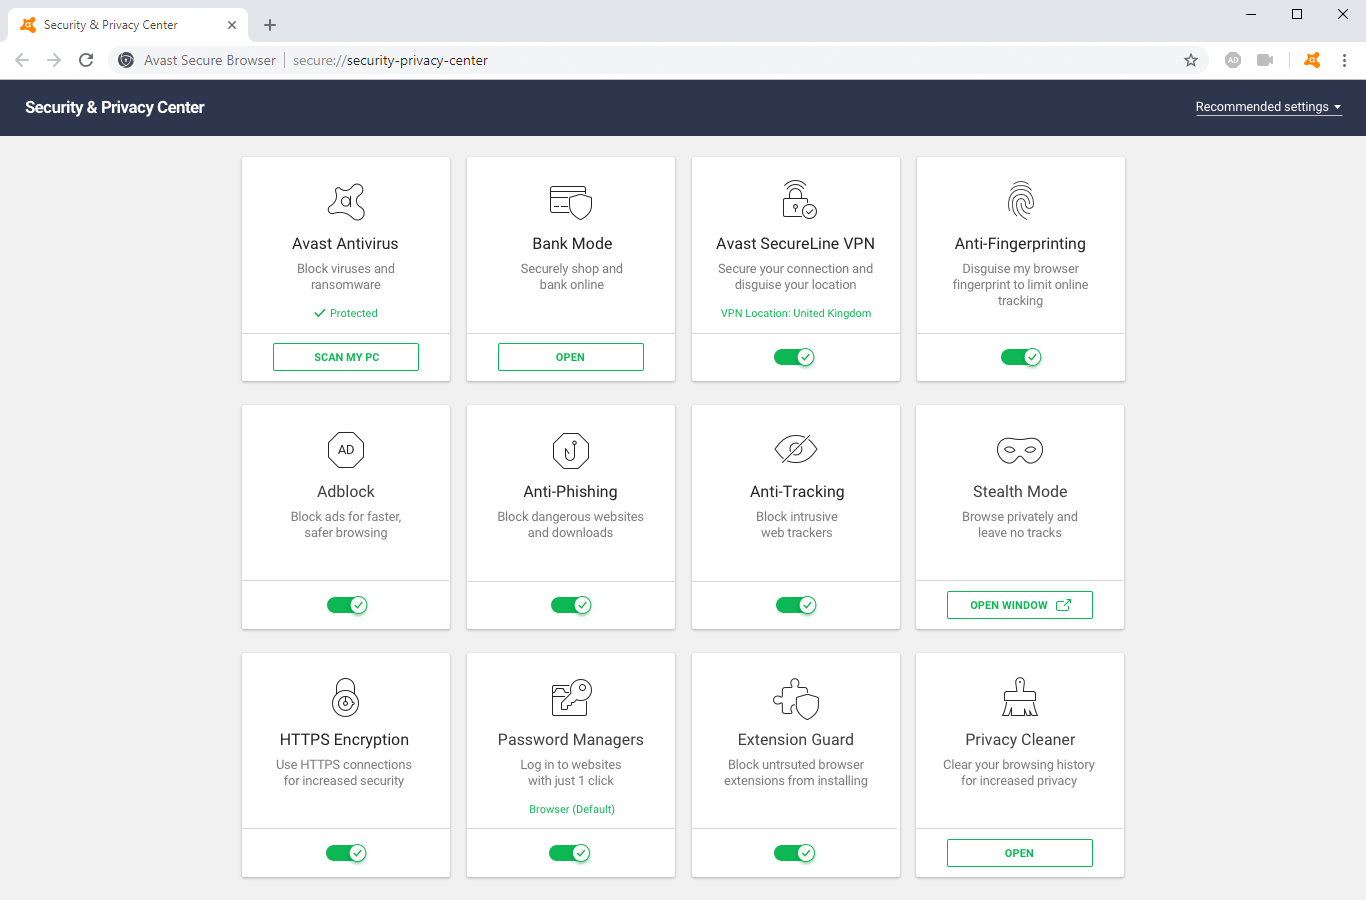 24012019 avast secure browser review screenshot 1